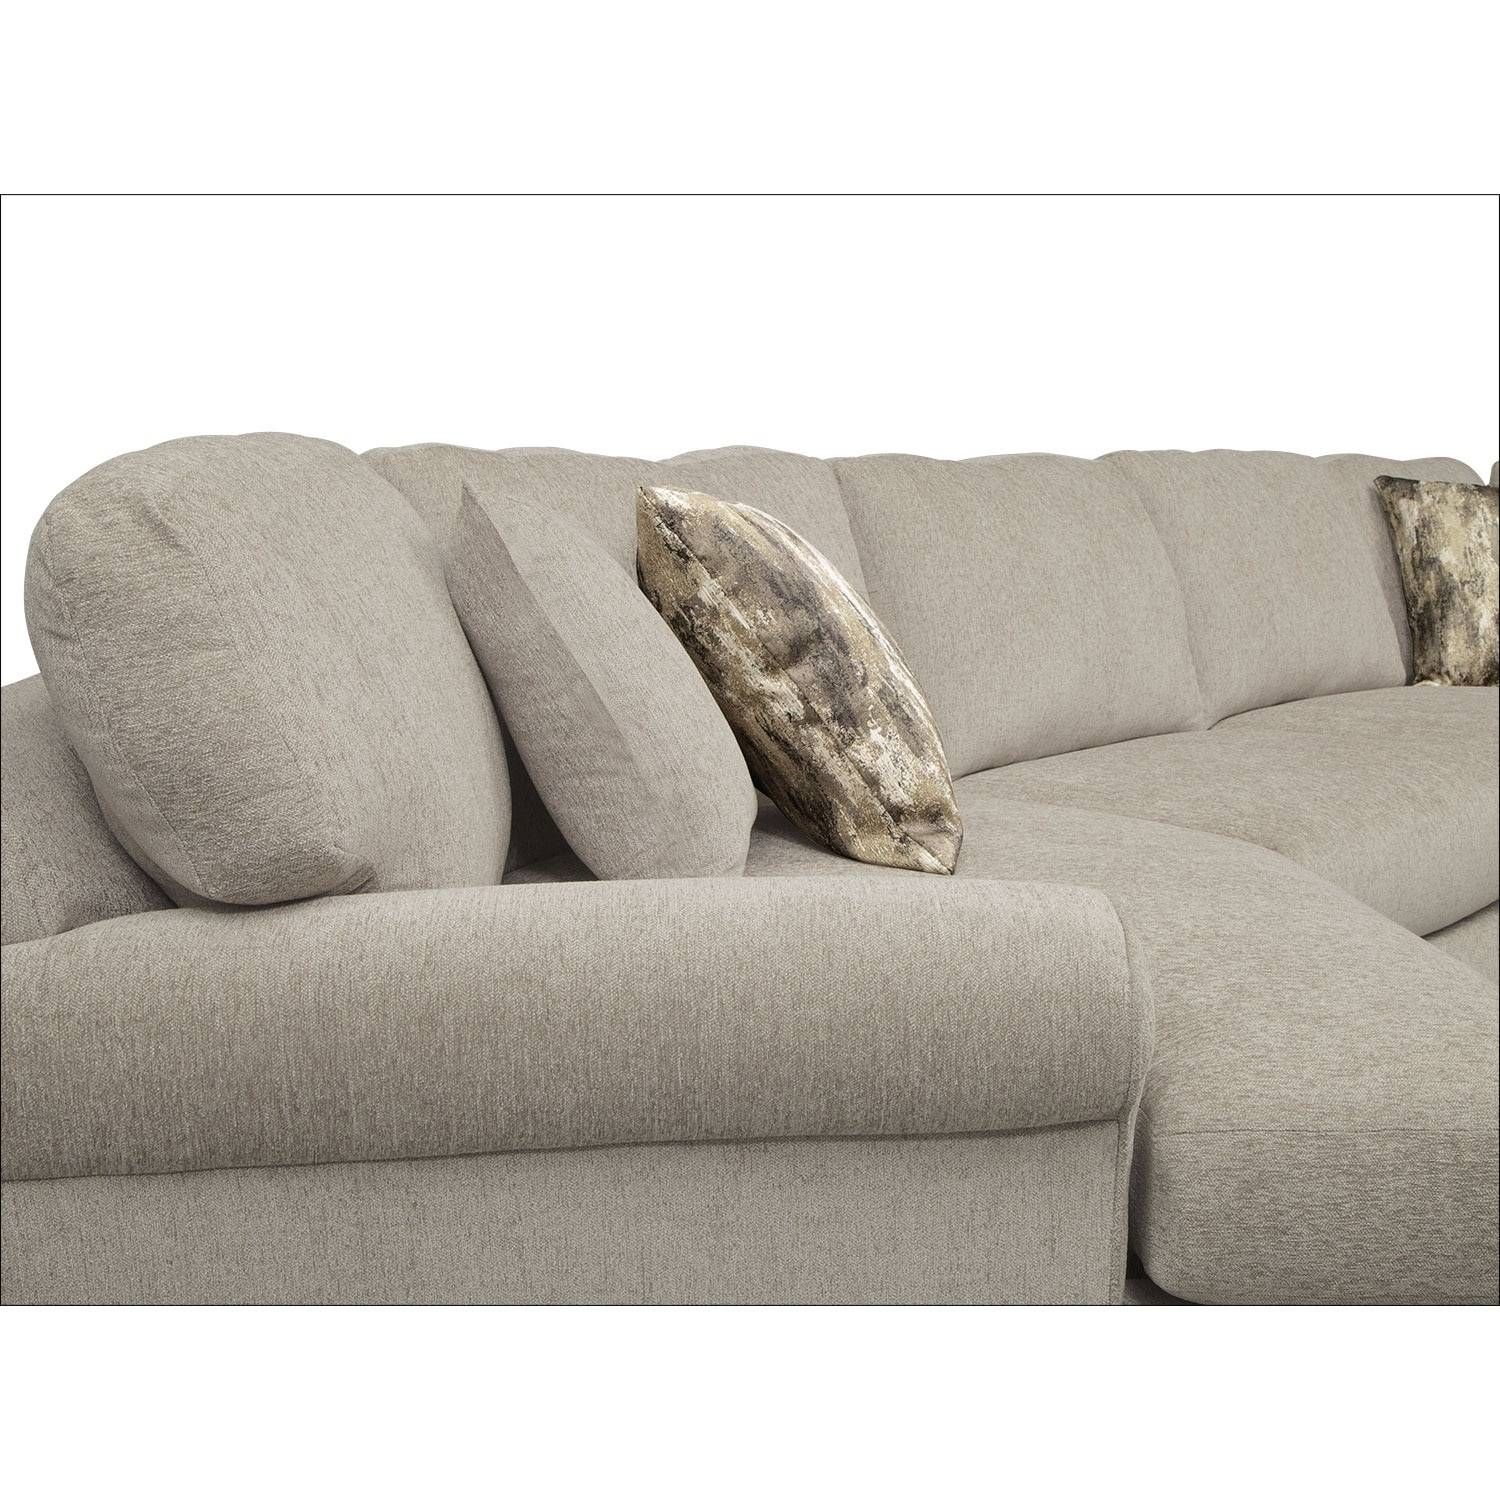 Karma 3 Piece Sectional With Left Facing Cuddler Mink Value Within Cuddler Sectional Sofa 